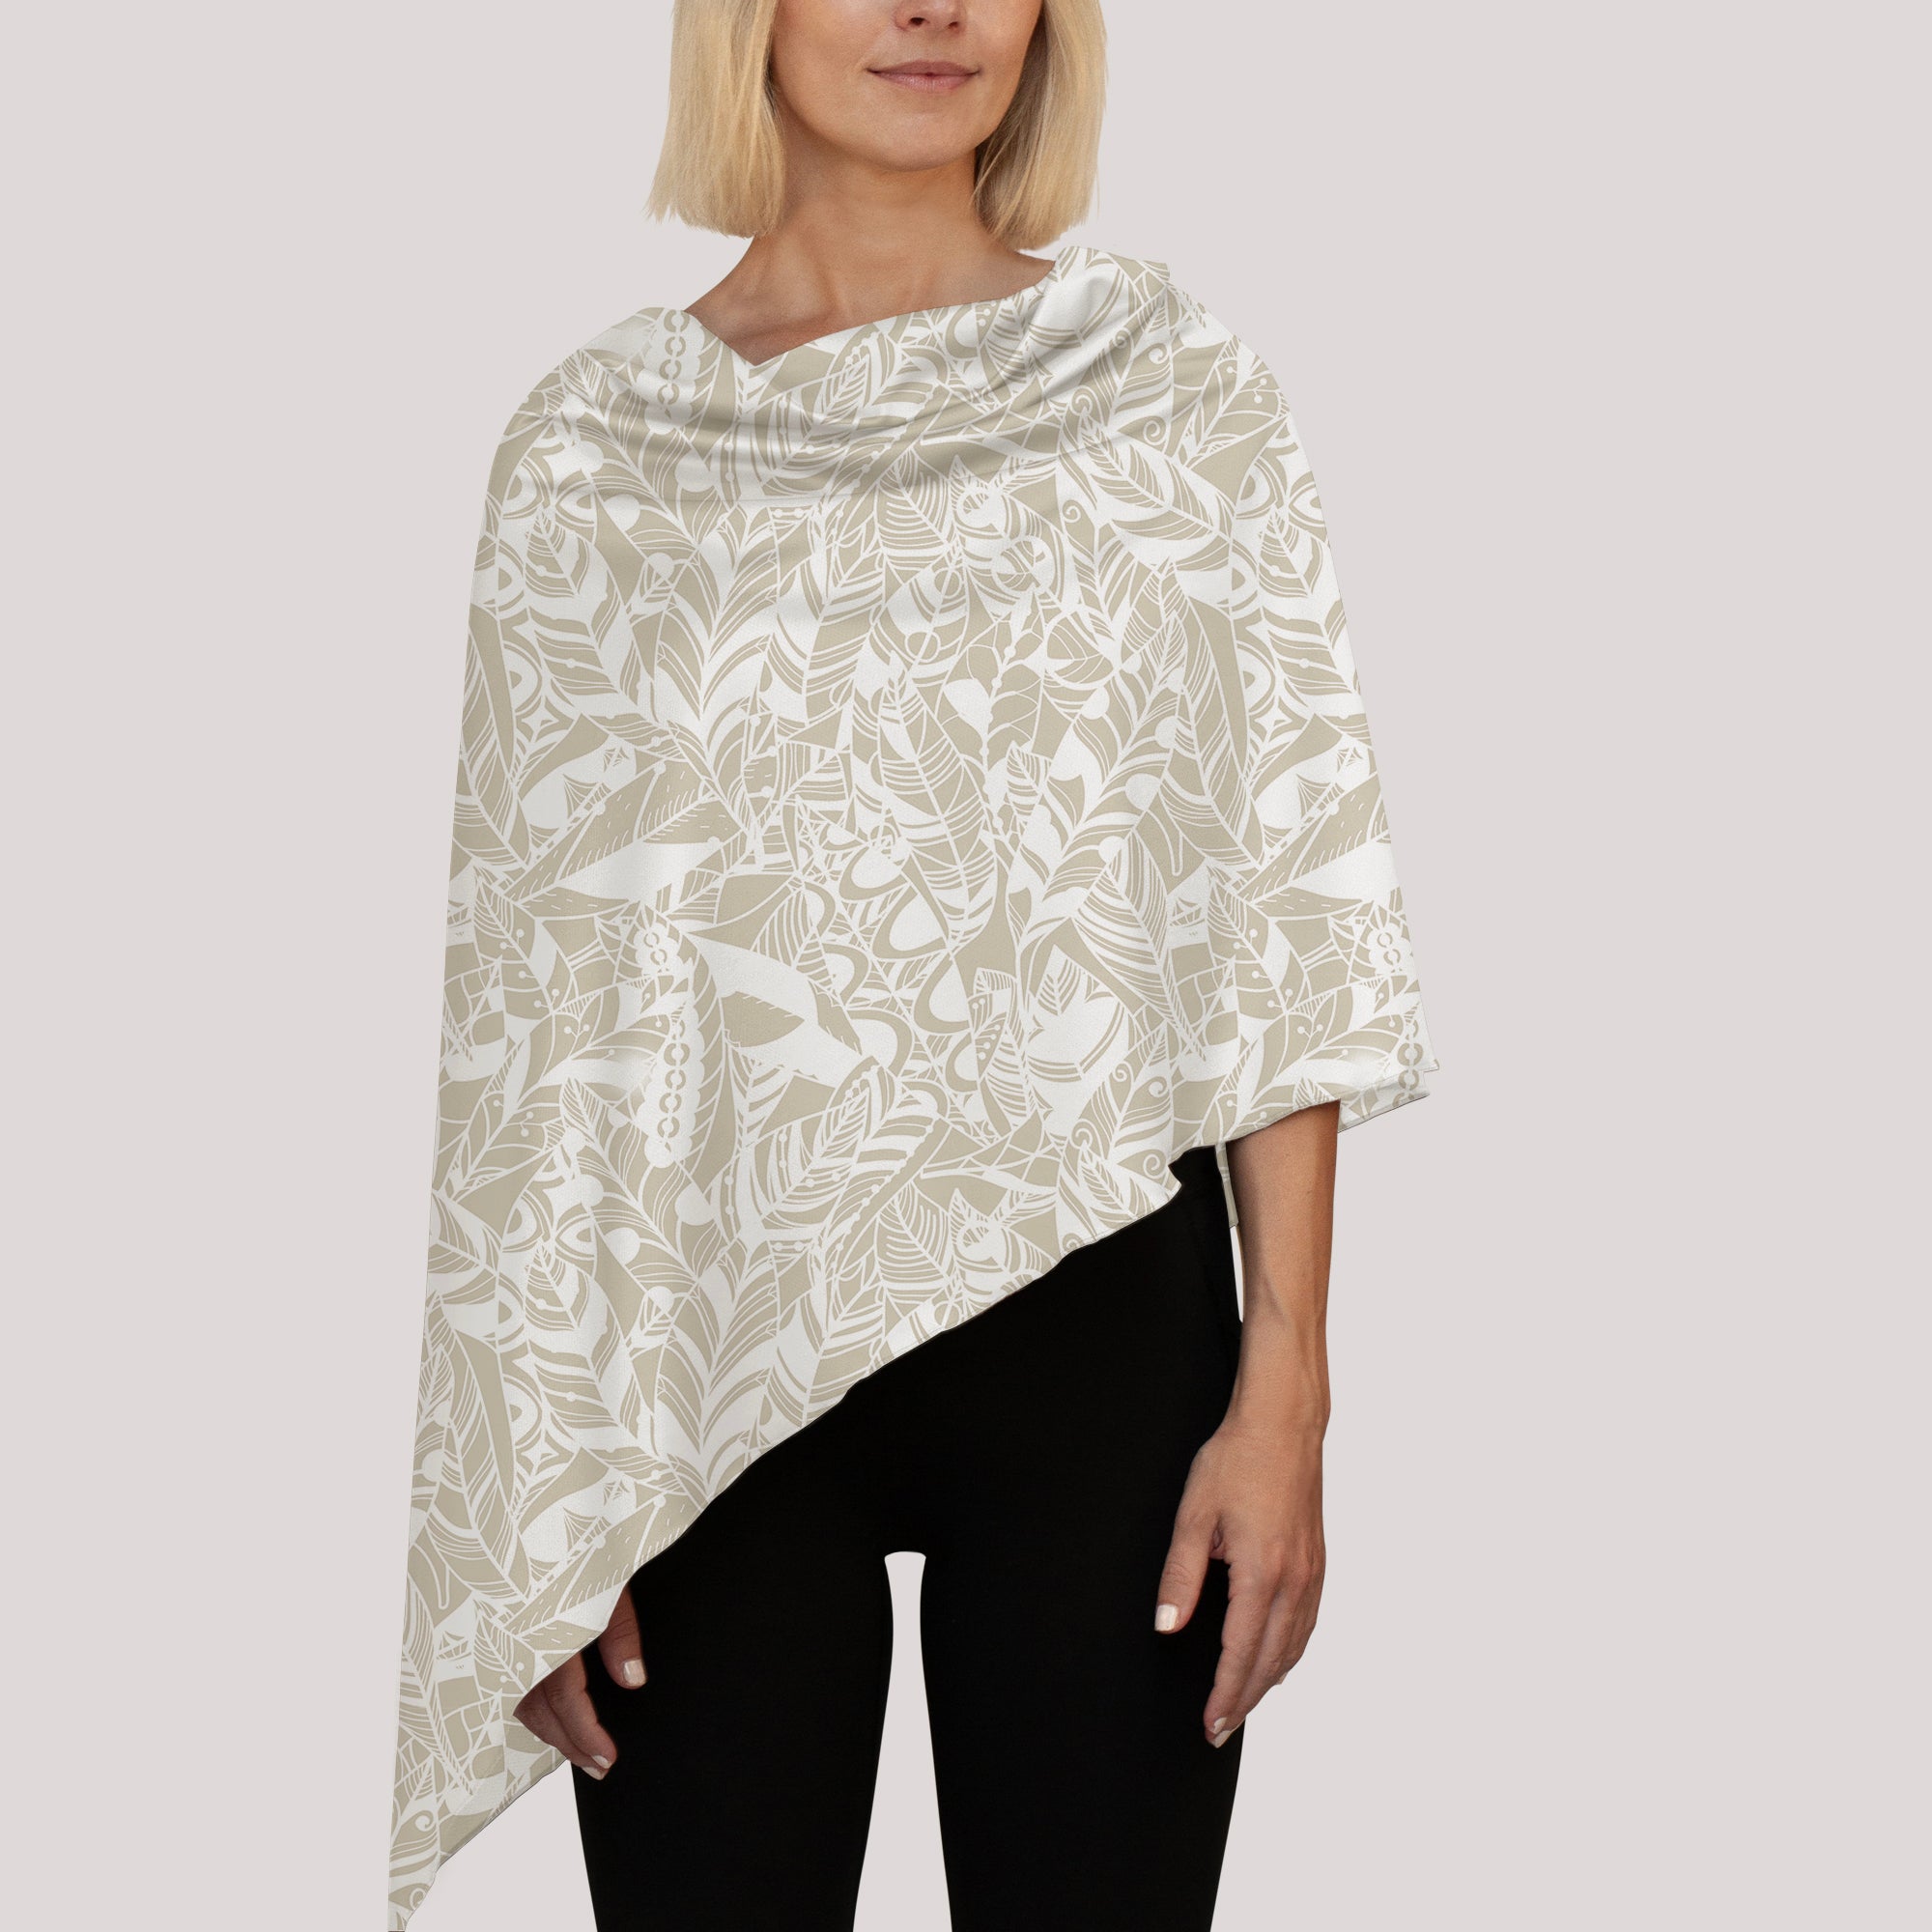 Ladies Poncho Oatmeal Tribal UPF50+ sun safe clothing, sun protective clothing for women, sun shirts, sun protection shirts, sun safe clothing, sun protection products Australia